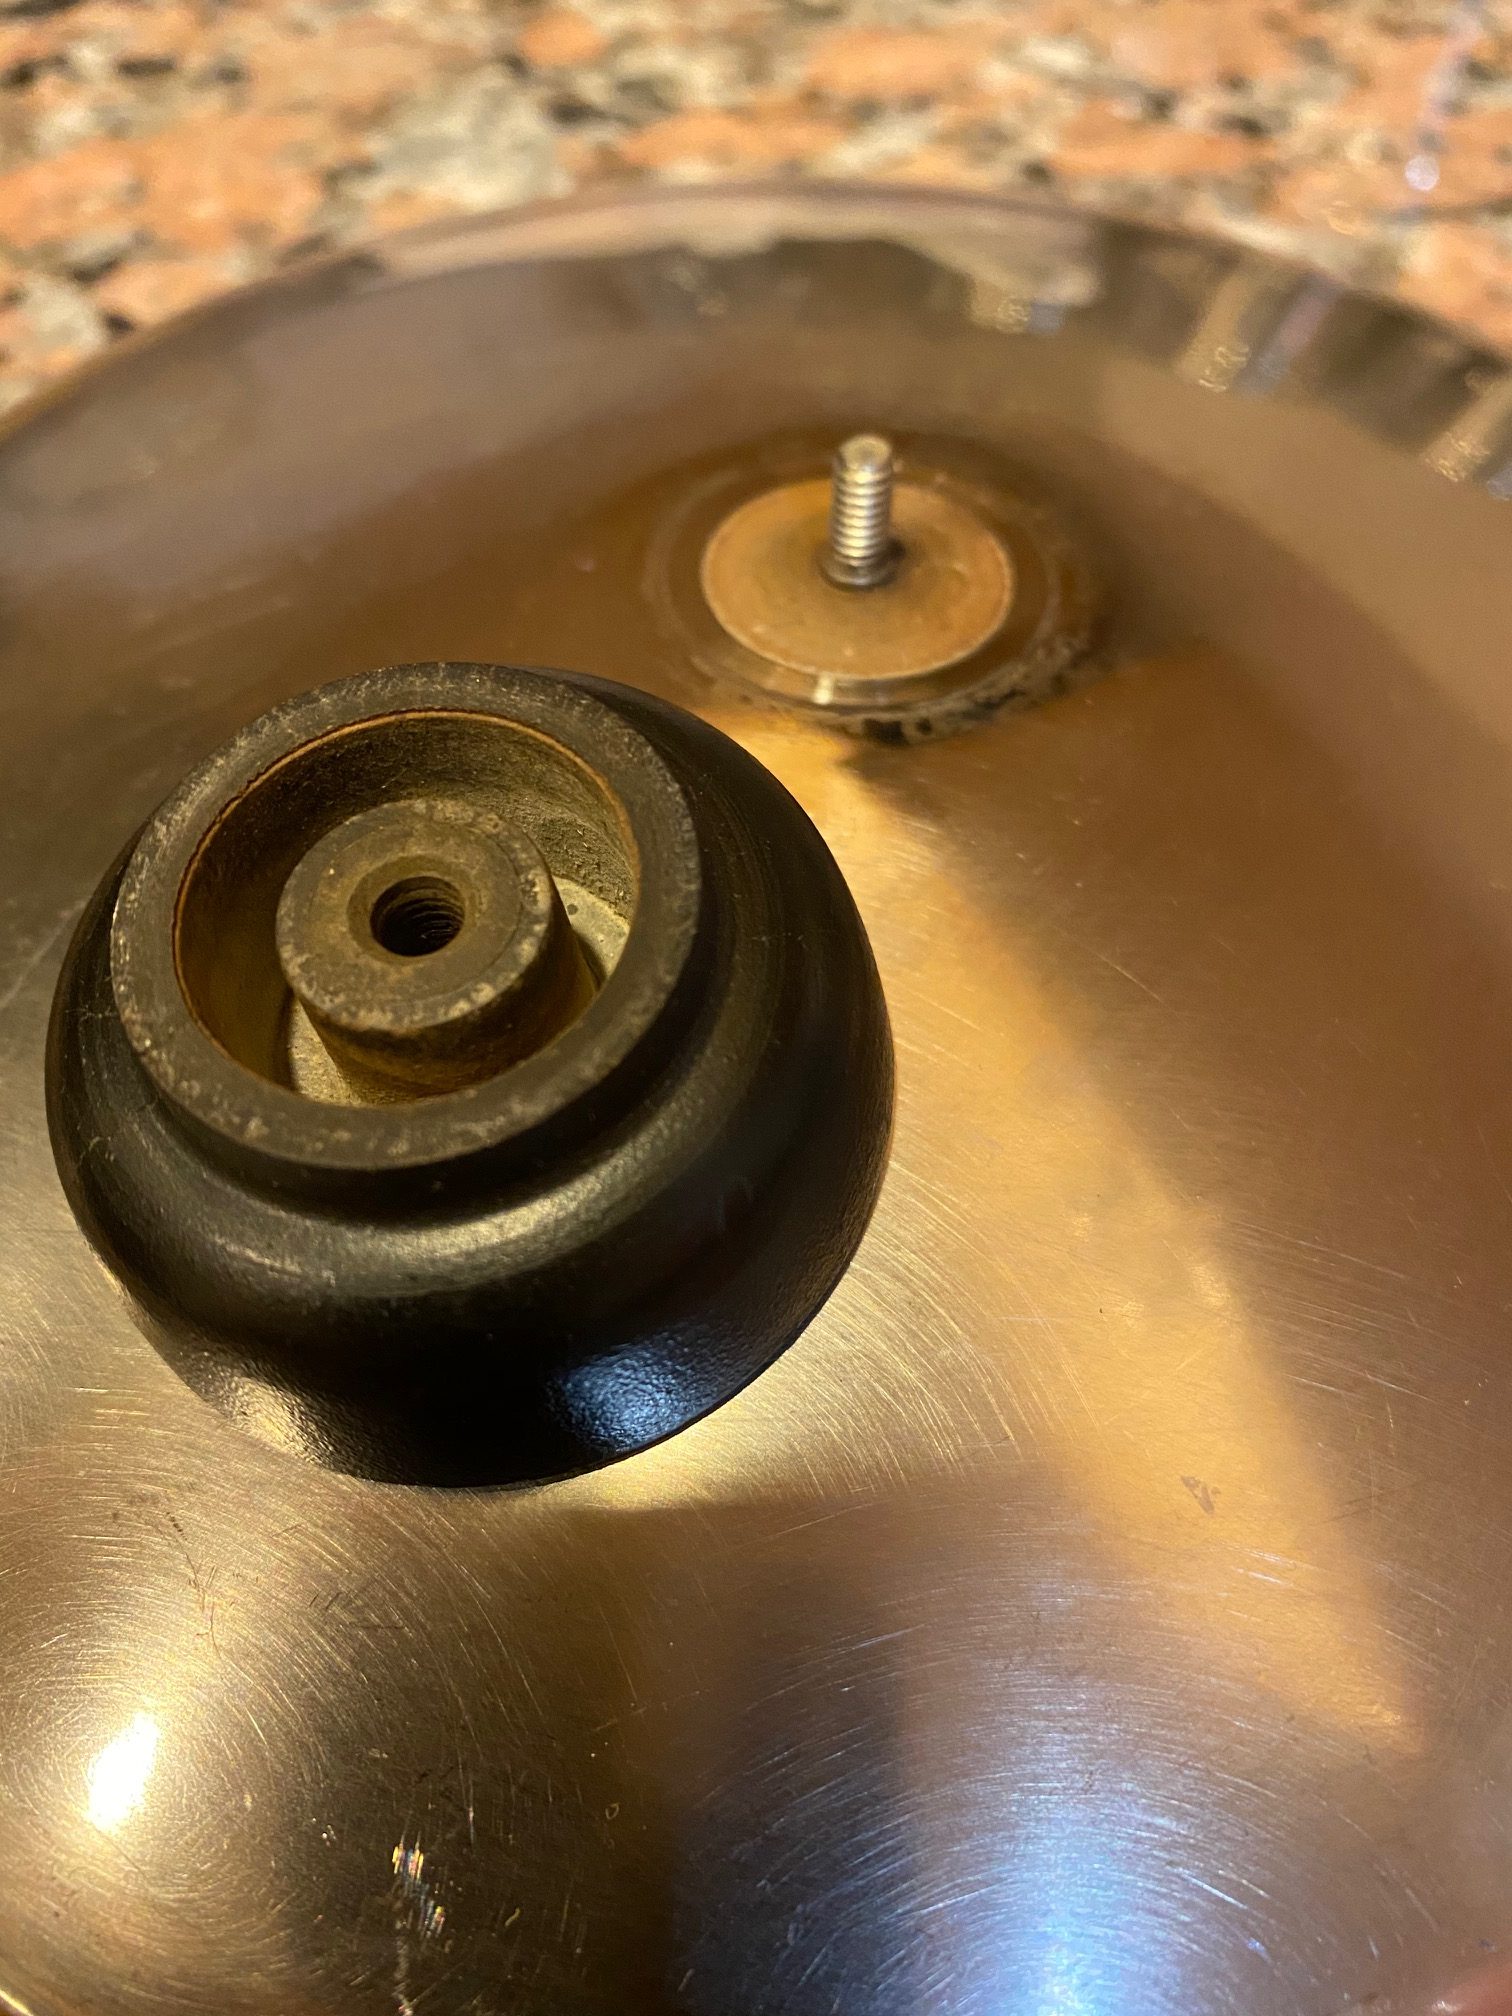 Replacement Lid Knob for Revere Ware Lids (single knob) 